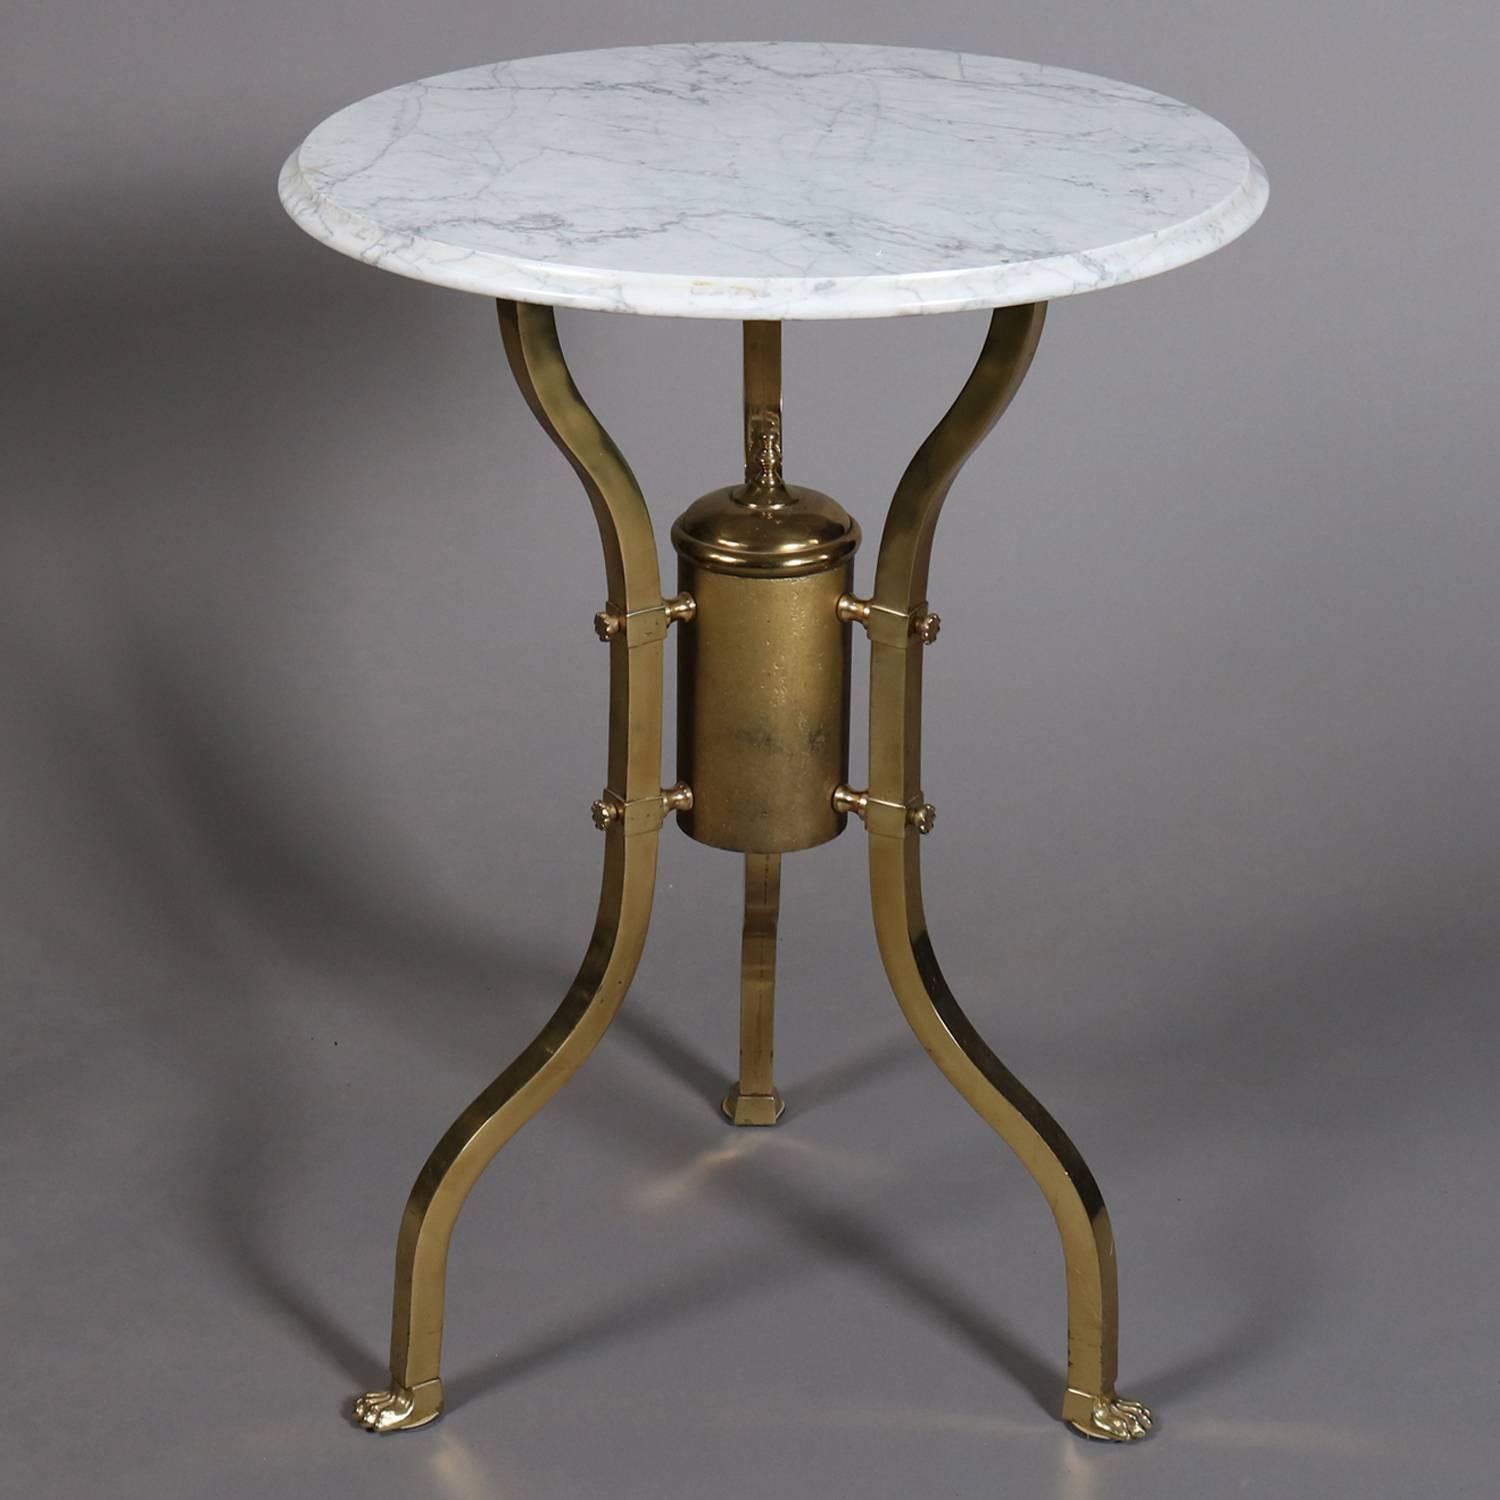 Italian Aesthetic Movement Brass and Marble Round Parlor Table, Paw Feet, Made in Italy